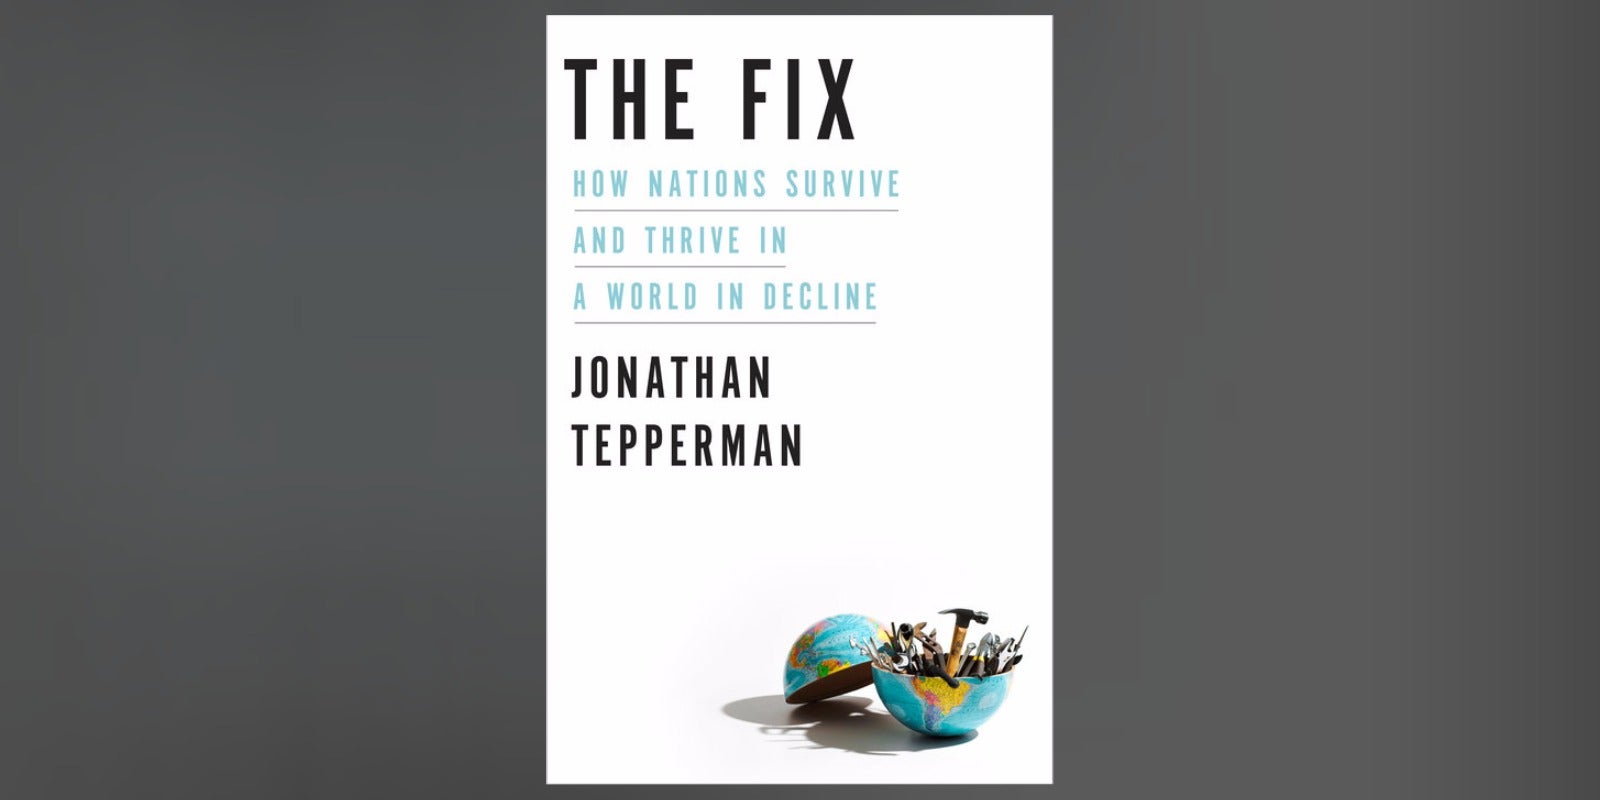 THE FIX: Surprising Stories of How Countries Solved the World’s Greatest Problems